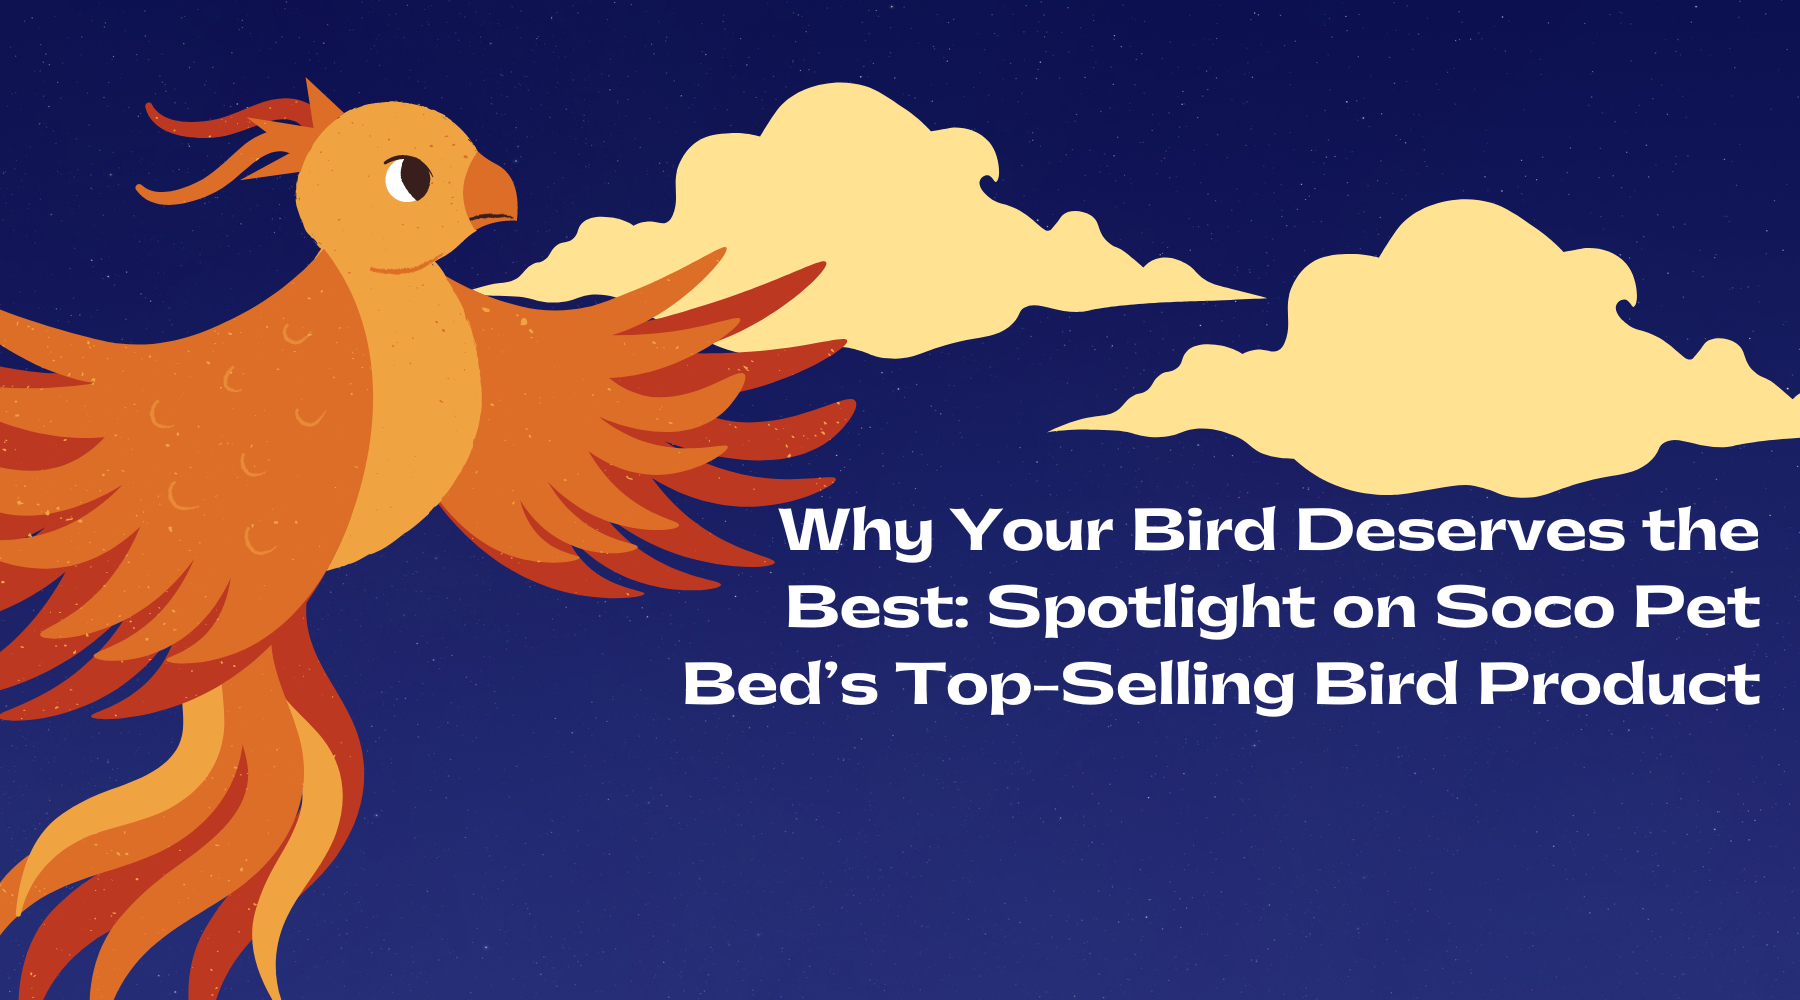 Why Your Bird Deserves the Best: Spotlight on Soco Pet Bed’s Top-Selling Bird Products